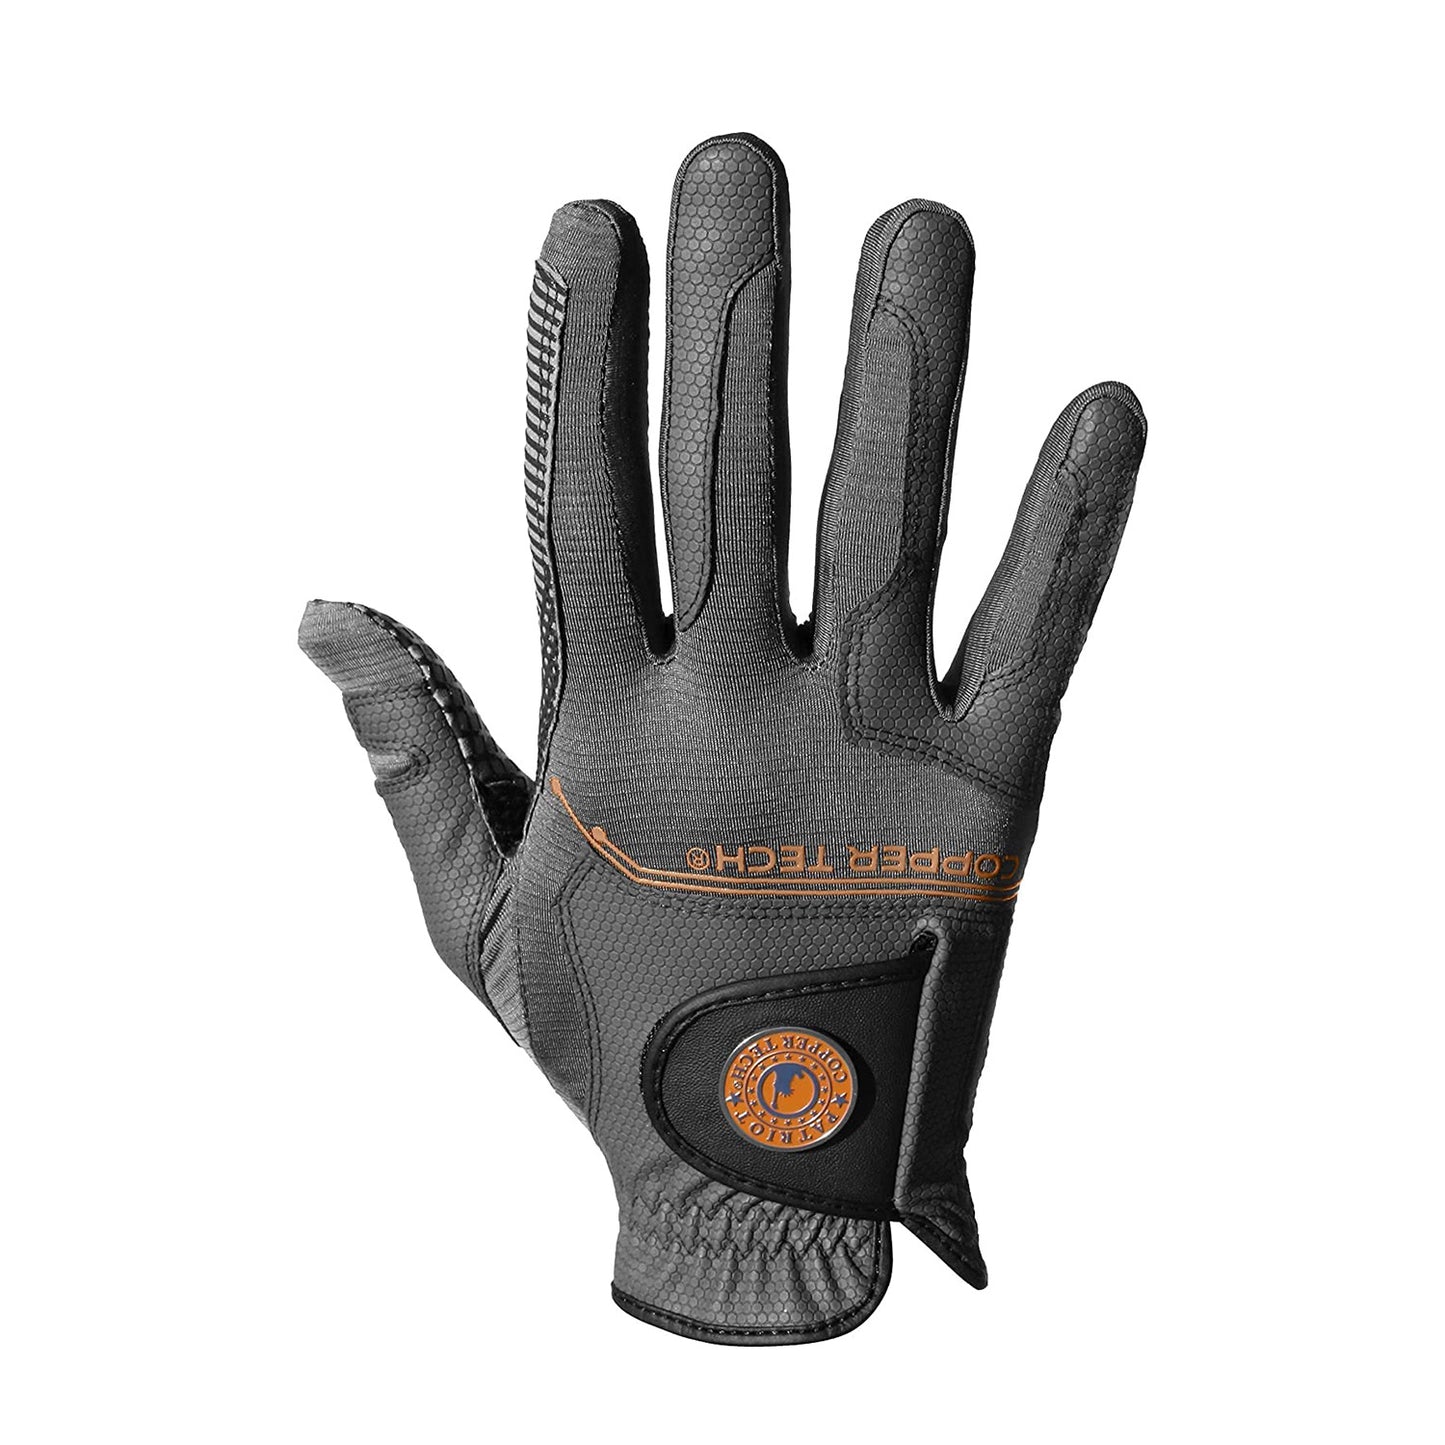 Copper Tech Men Charcoal Gray/Combi Spider Tacky Golf Glove (2 Packs) Worn On Right For Left Handed